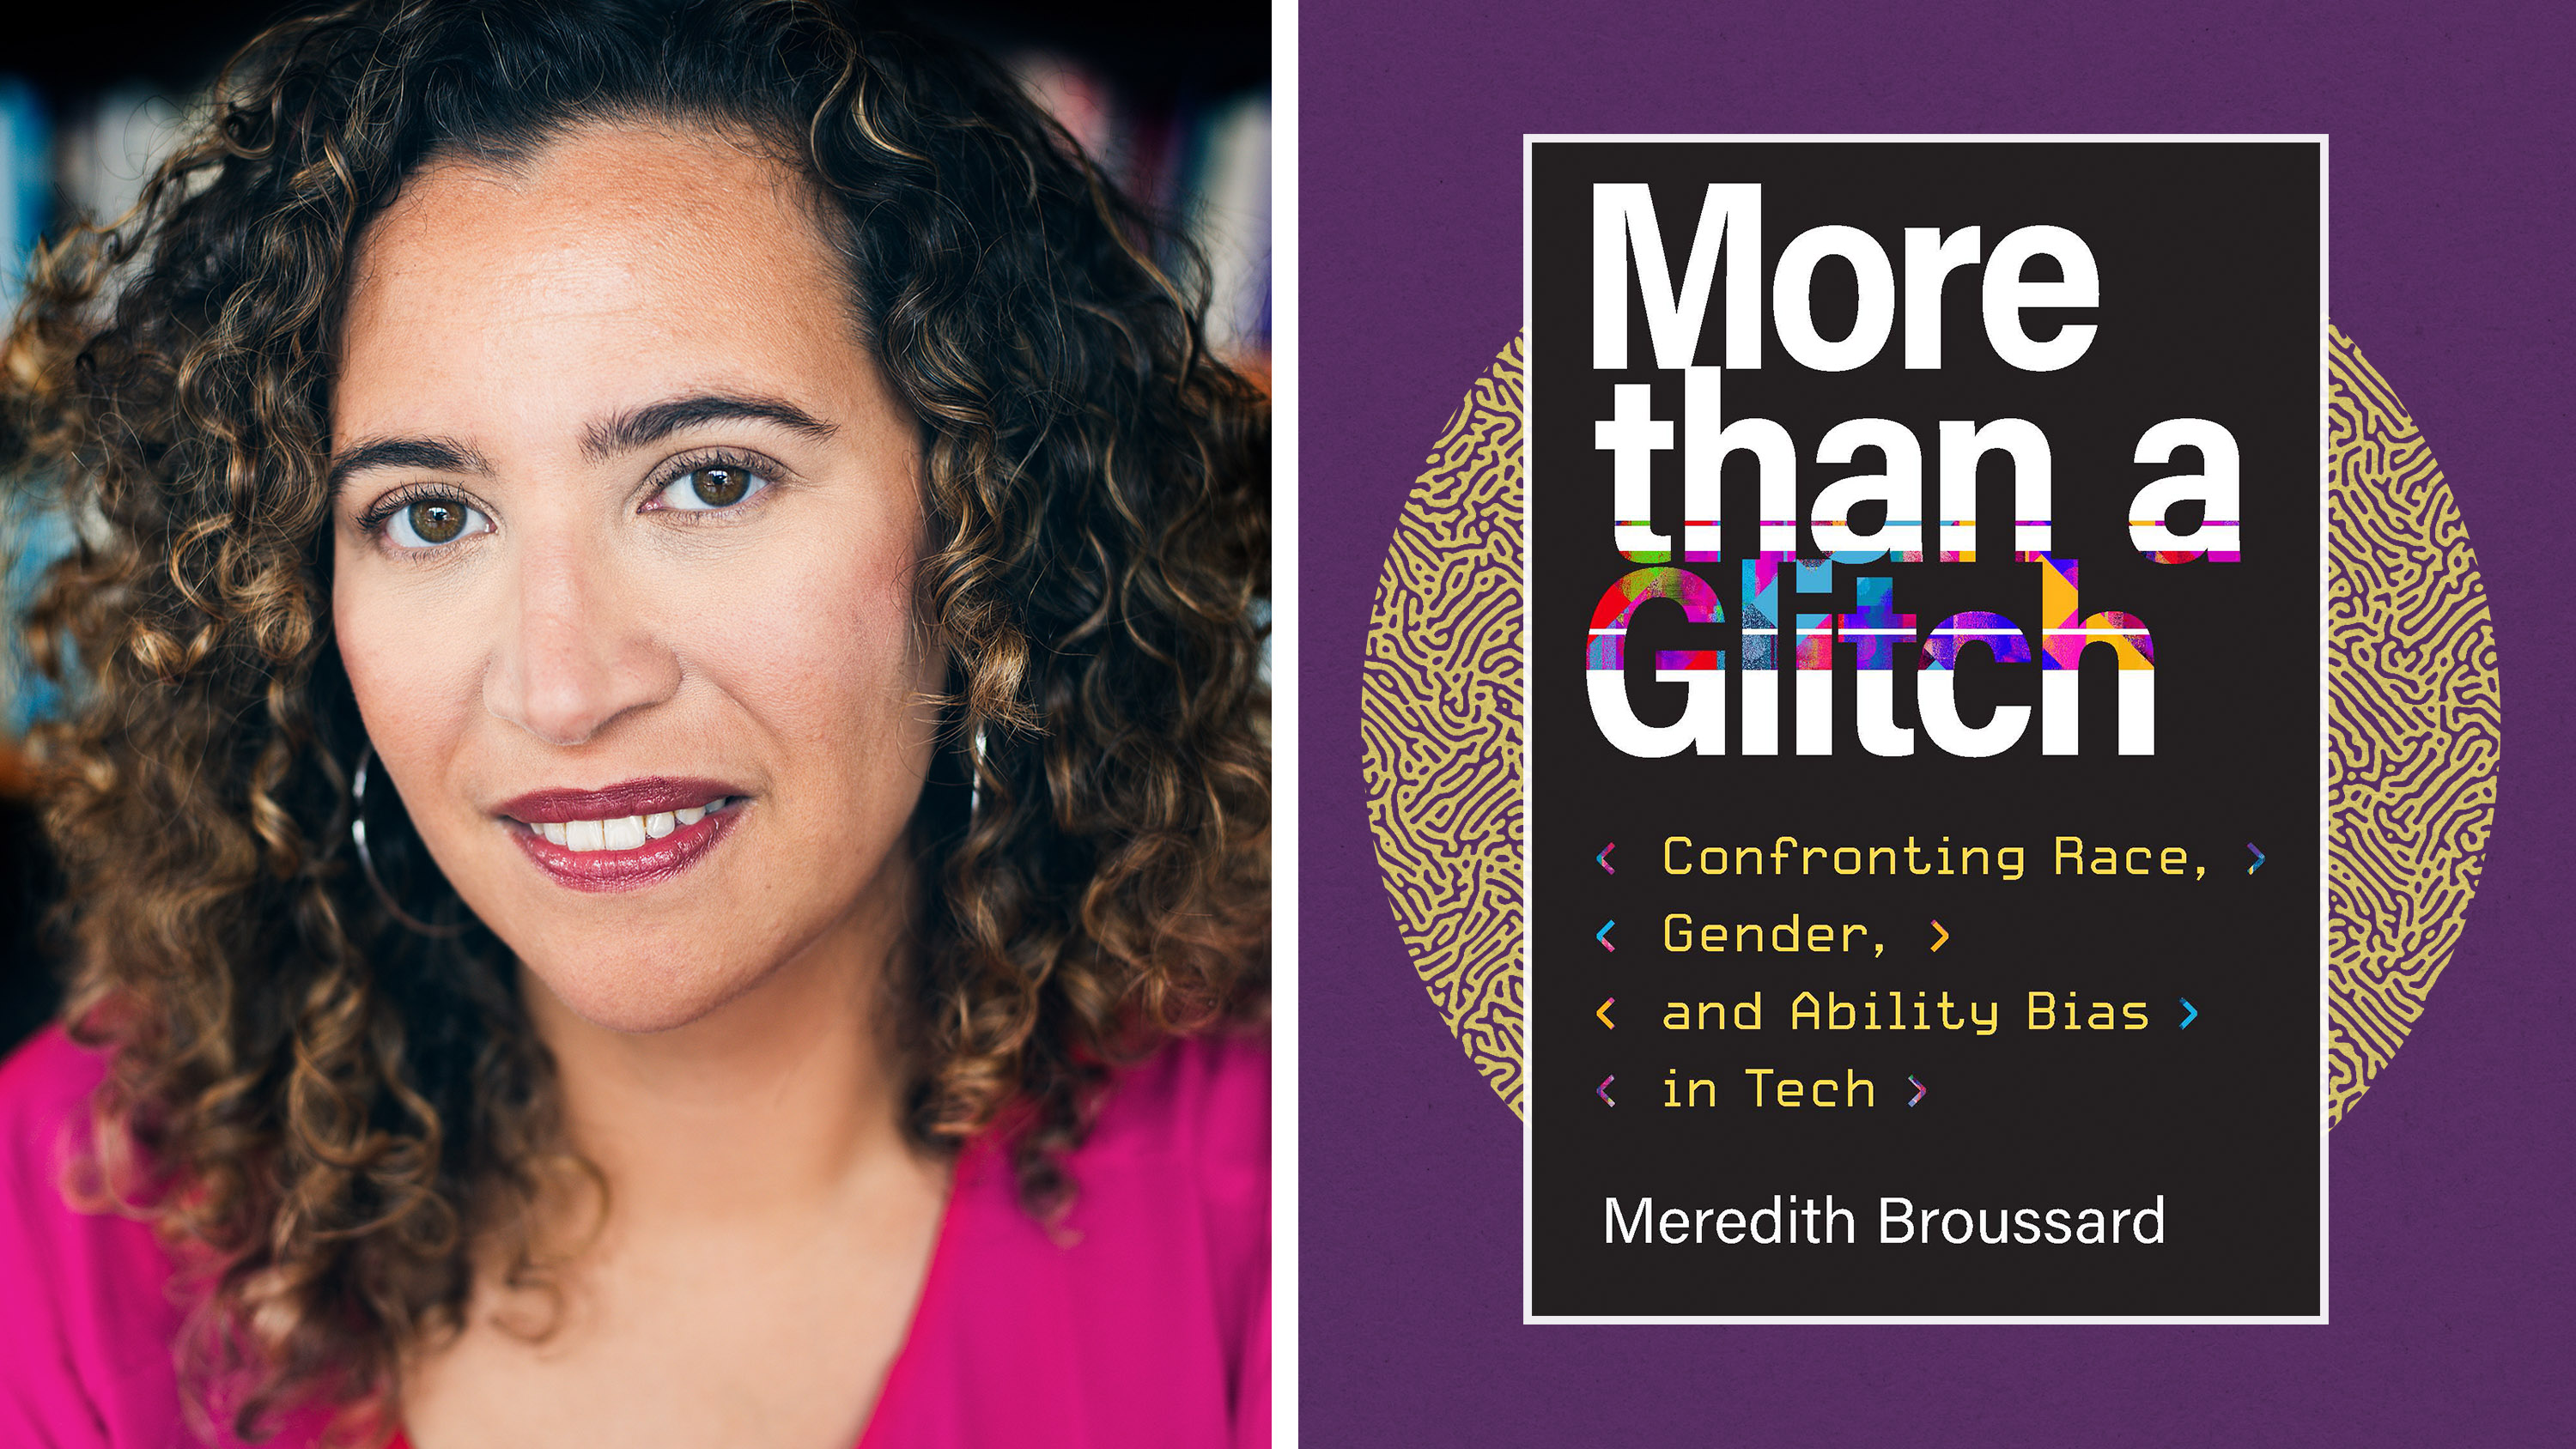 Meredith Broussard and cover of her book, More than a Glitch